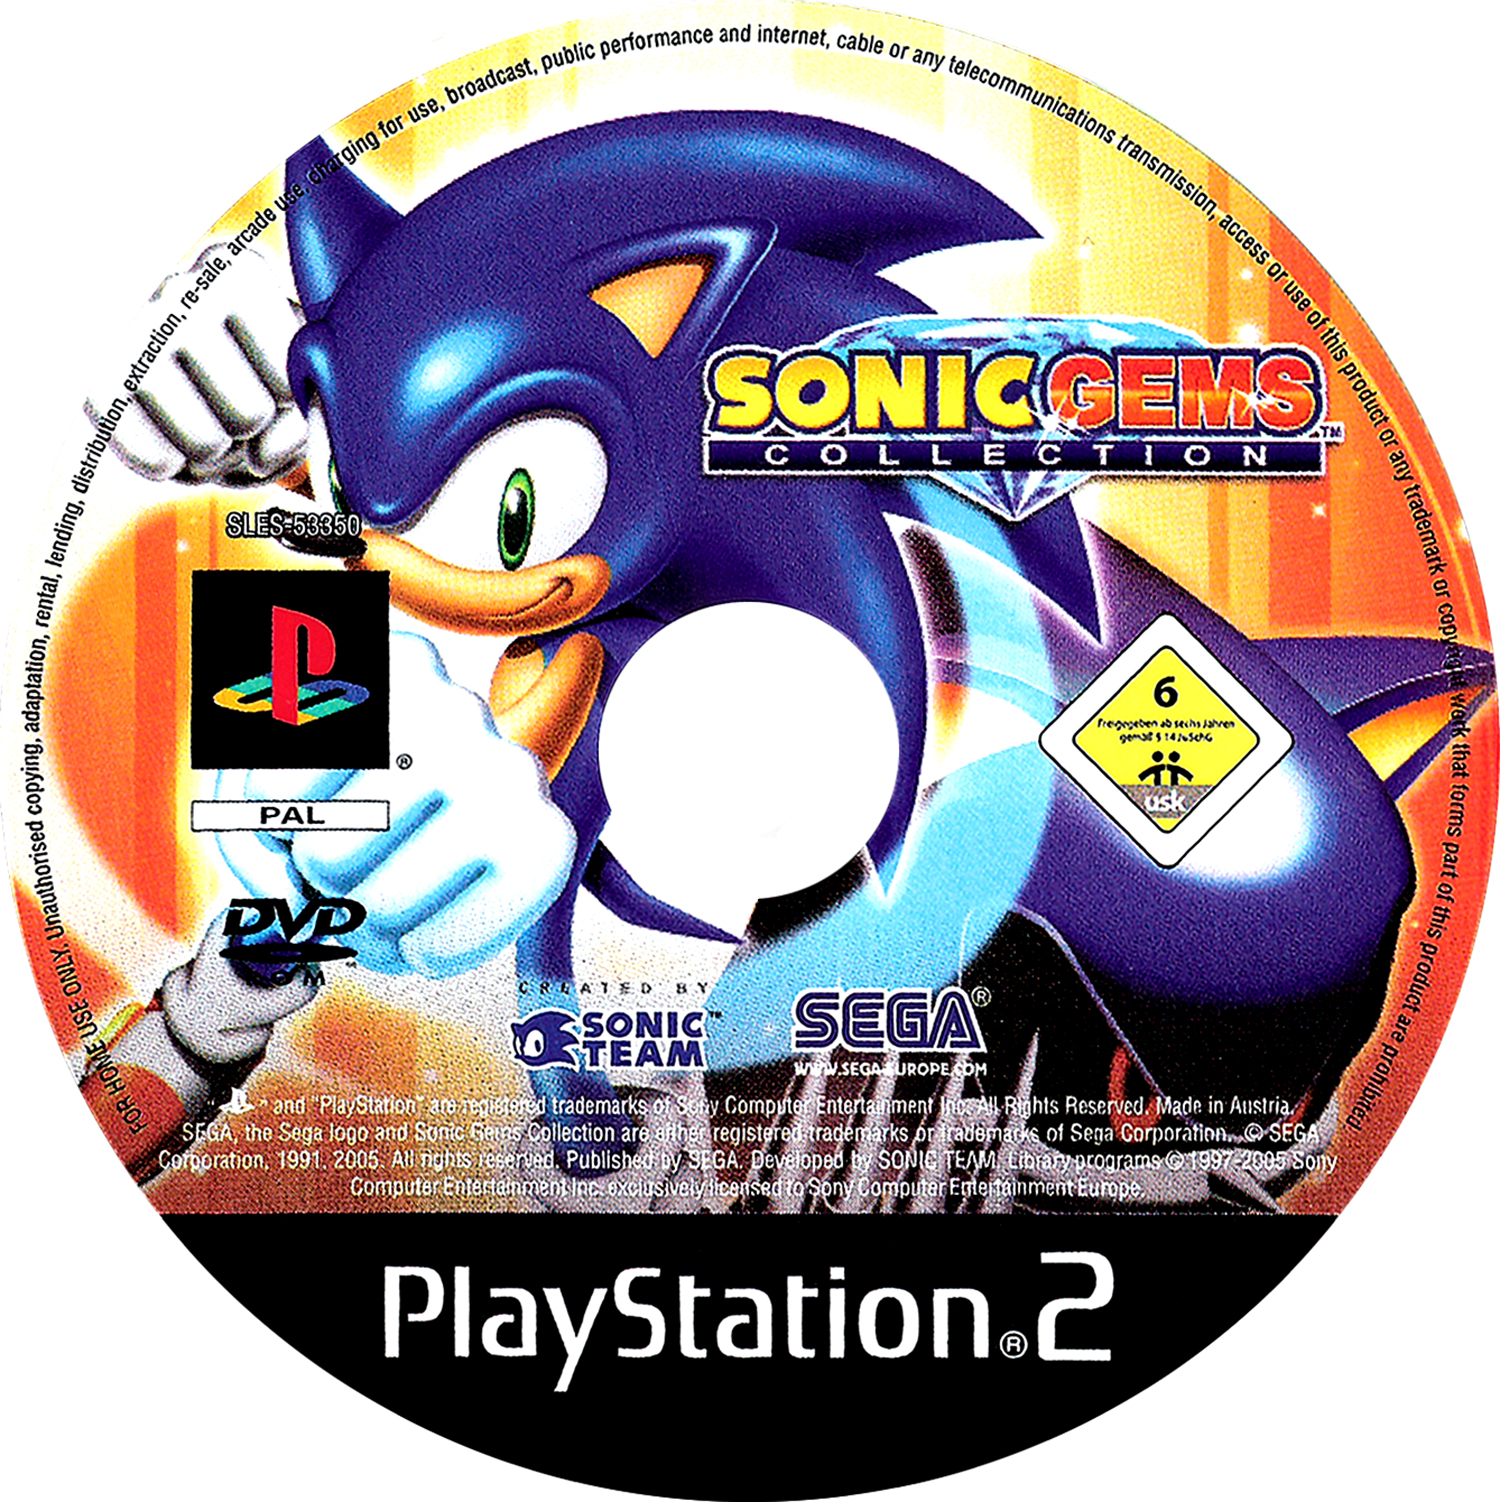 sonic unleashed ps3 iso file